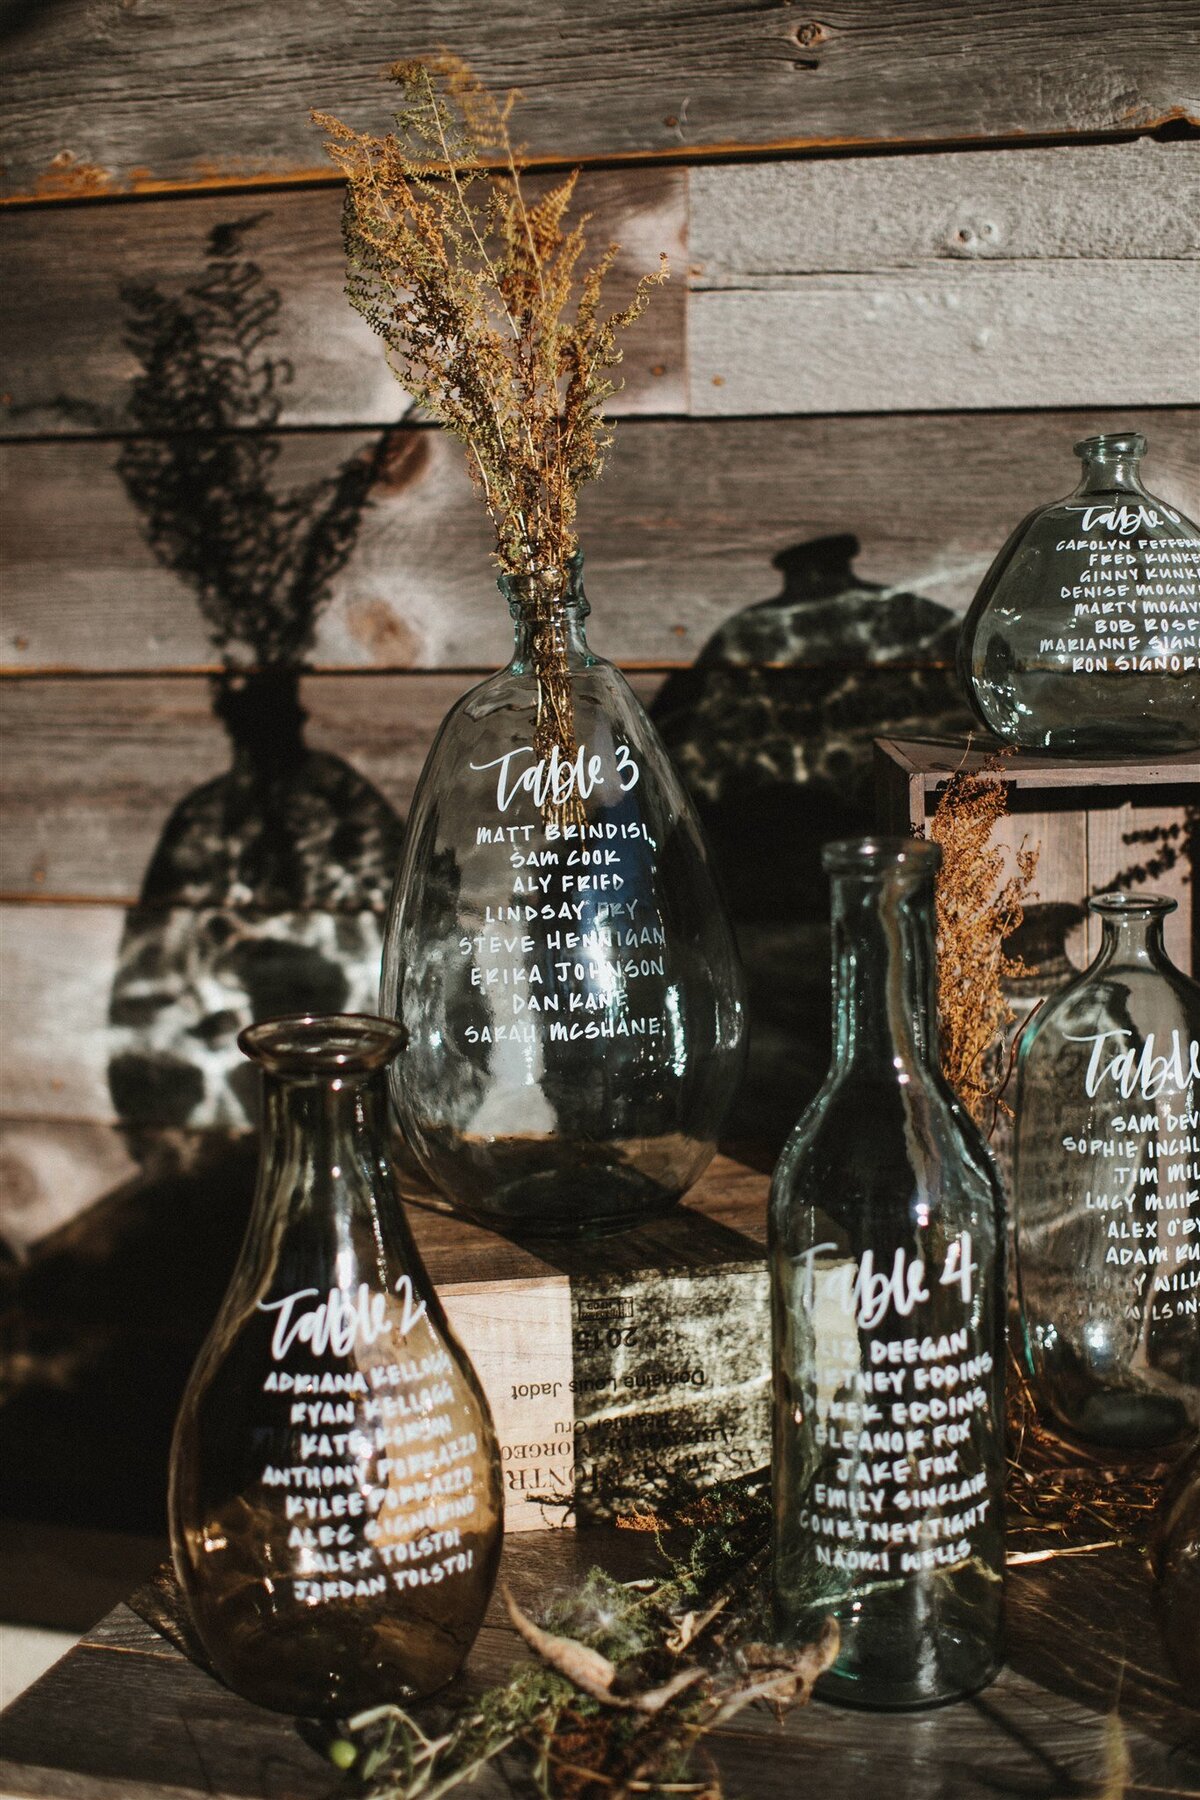 Glass bottle seating chart with calligraphy